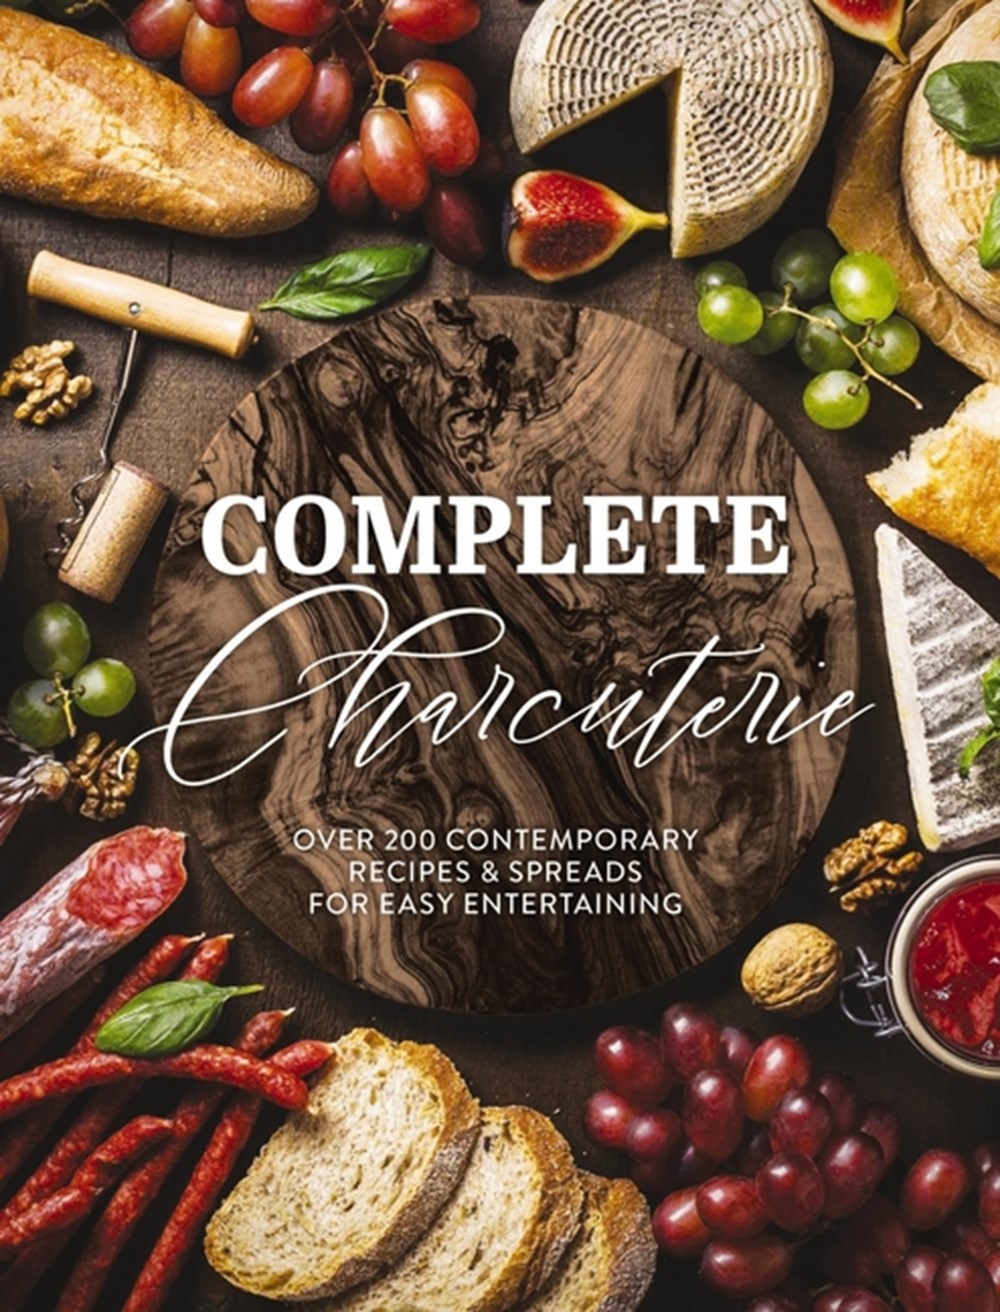 Complete Charcuterie: Over 200 Contemporary Spreads for Easy Entertaining (Charcuterie, Serving Boar